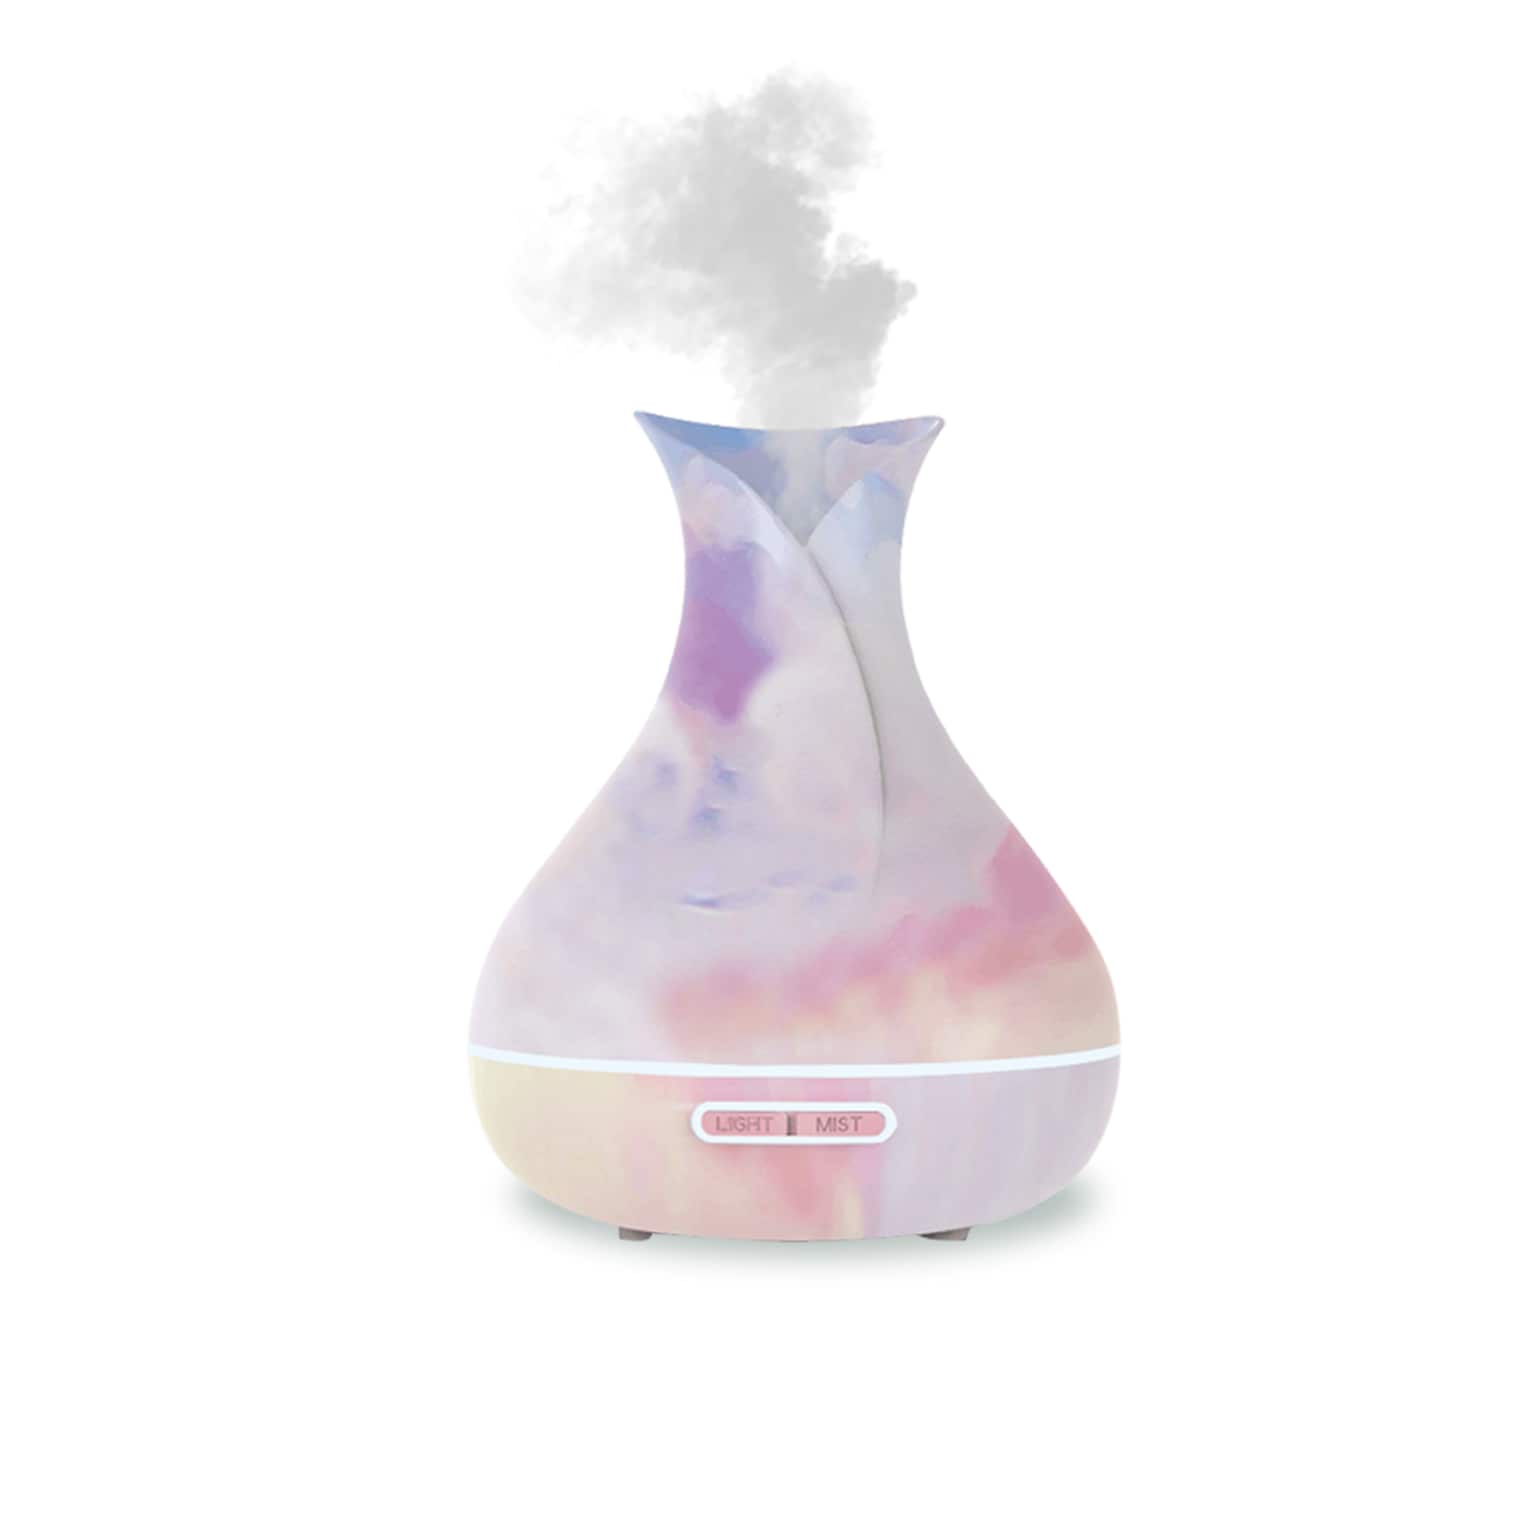 Extreme Fit Liquid Diffuser, 300ml, Tie Dyed (SB-AOD-SPI)